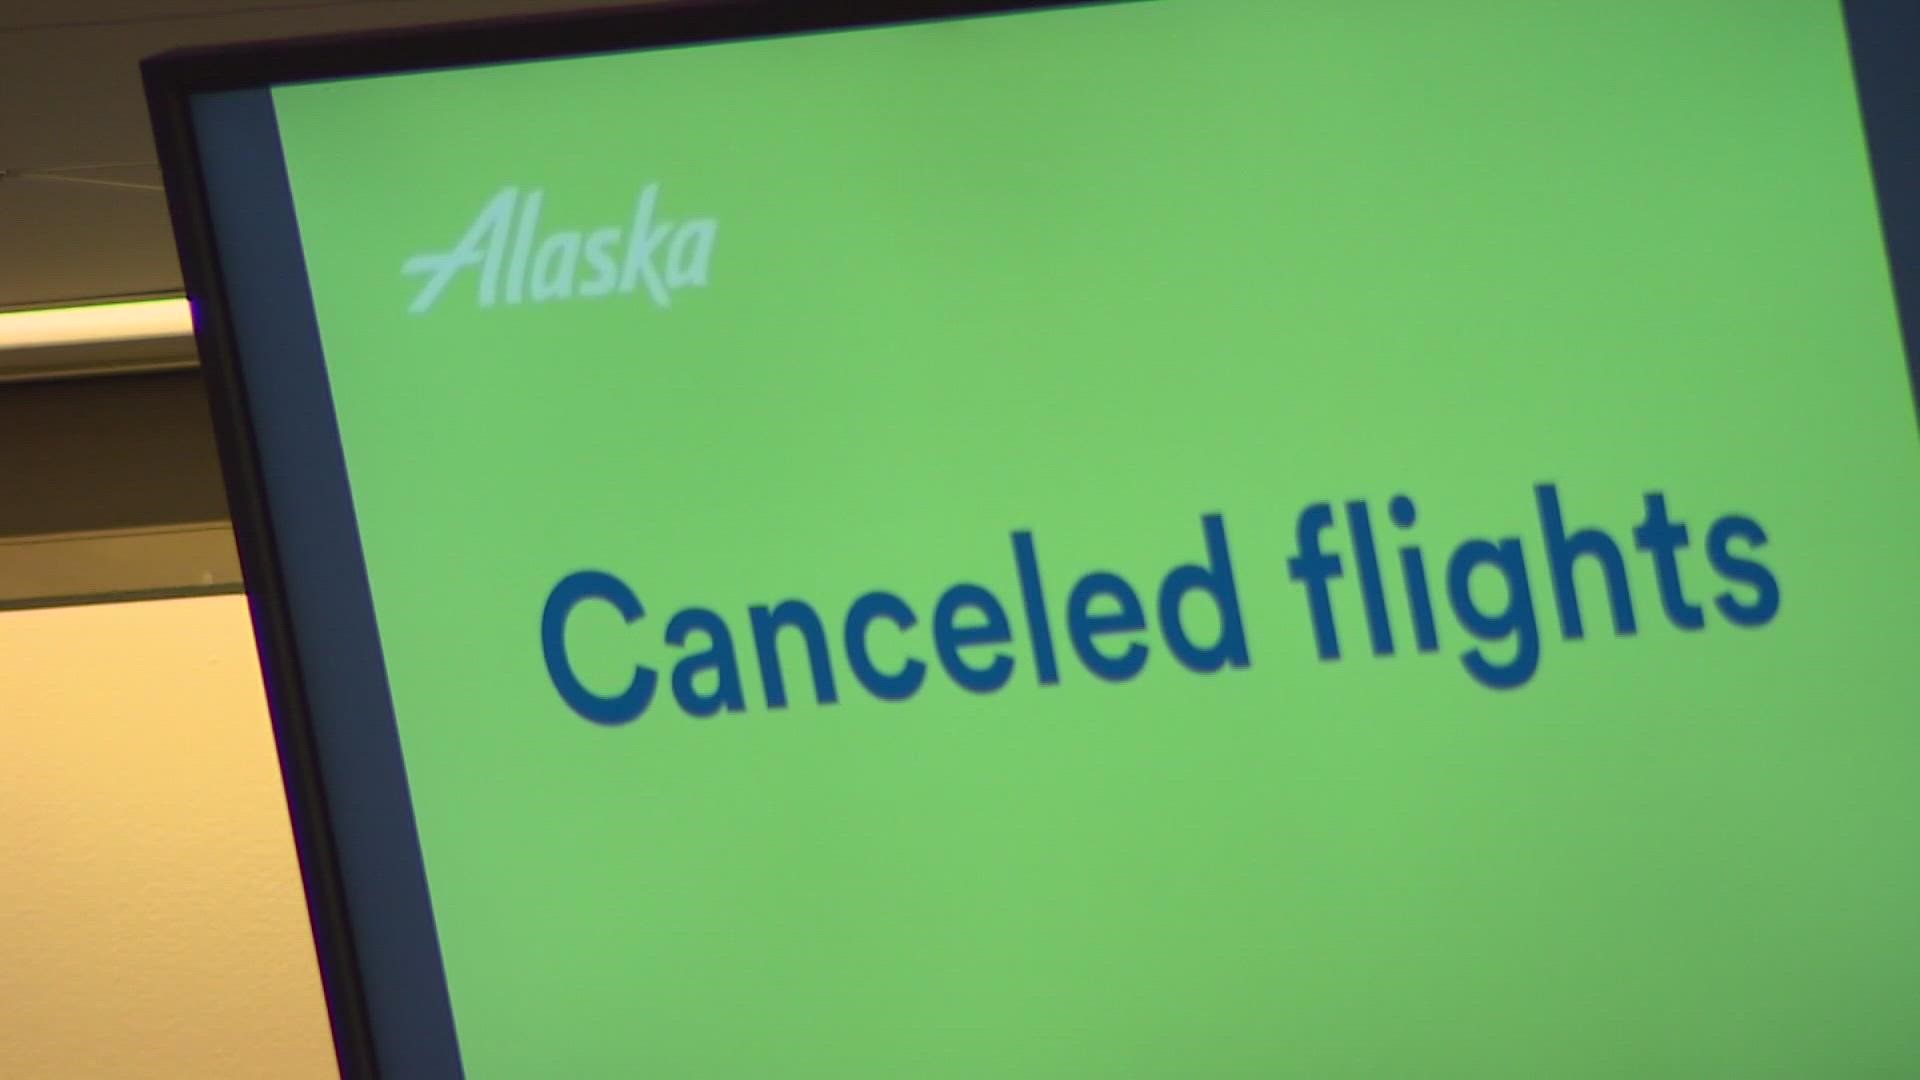 Alaska Airlines says the primary cause for their recent rash of canceled flights is due to delayed pilot training programs and a lack of personnel